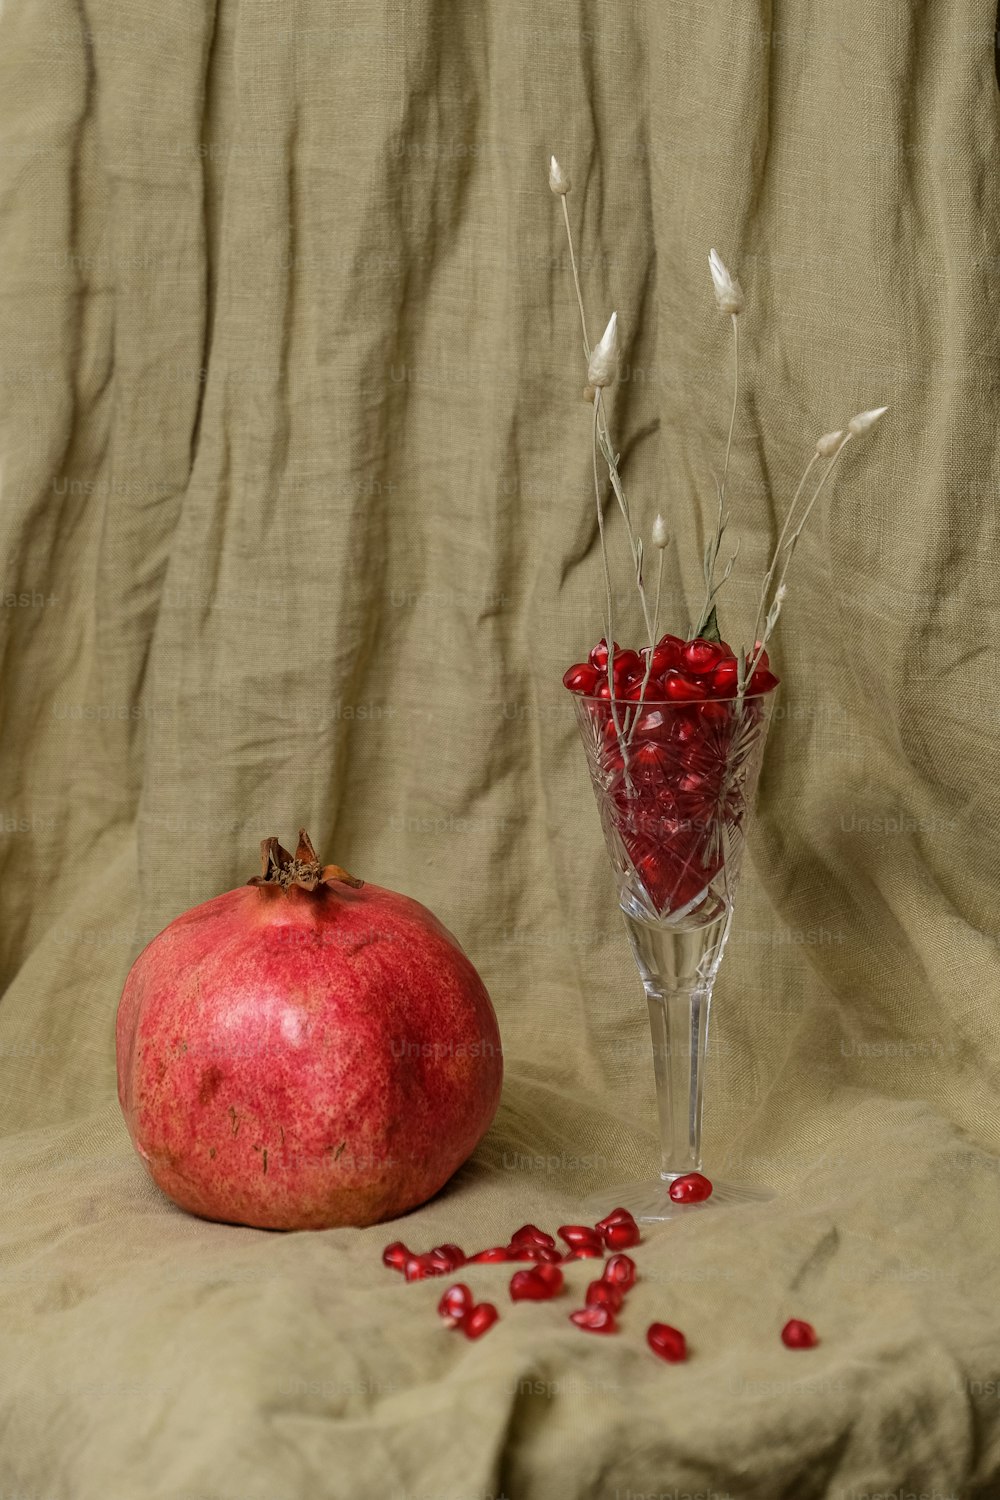 a pomegranate sitting next to a glass vase filled with pomegra